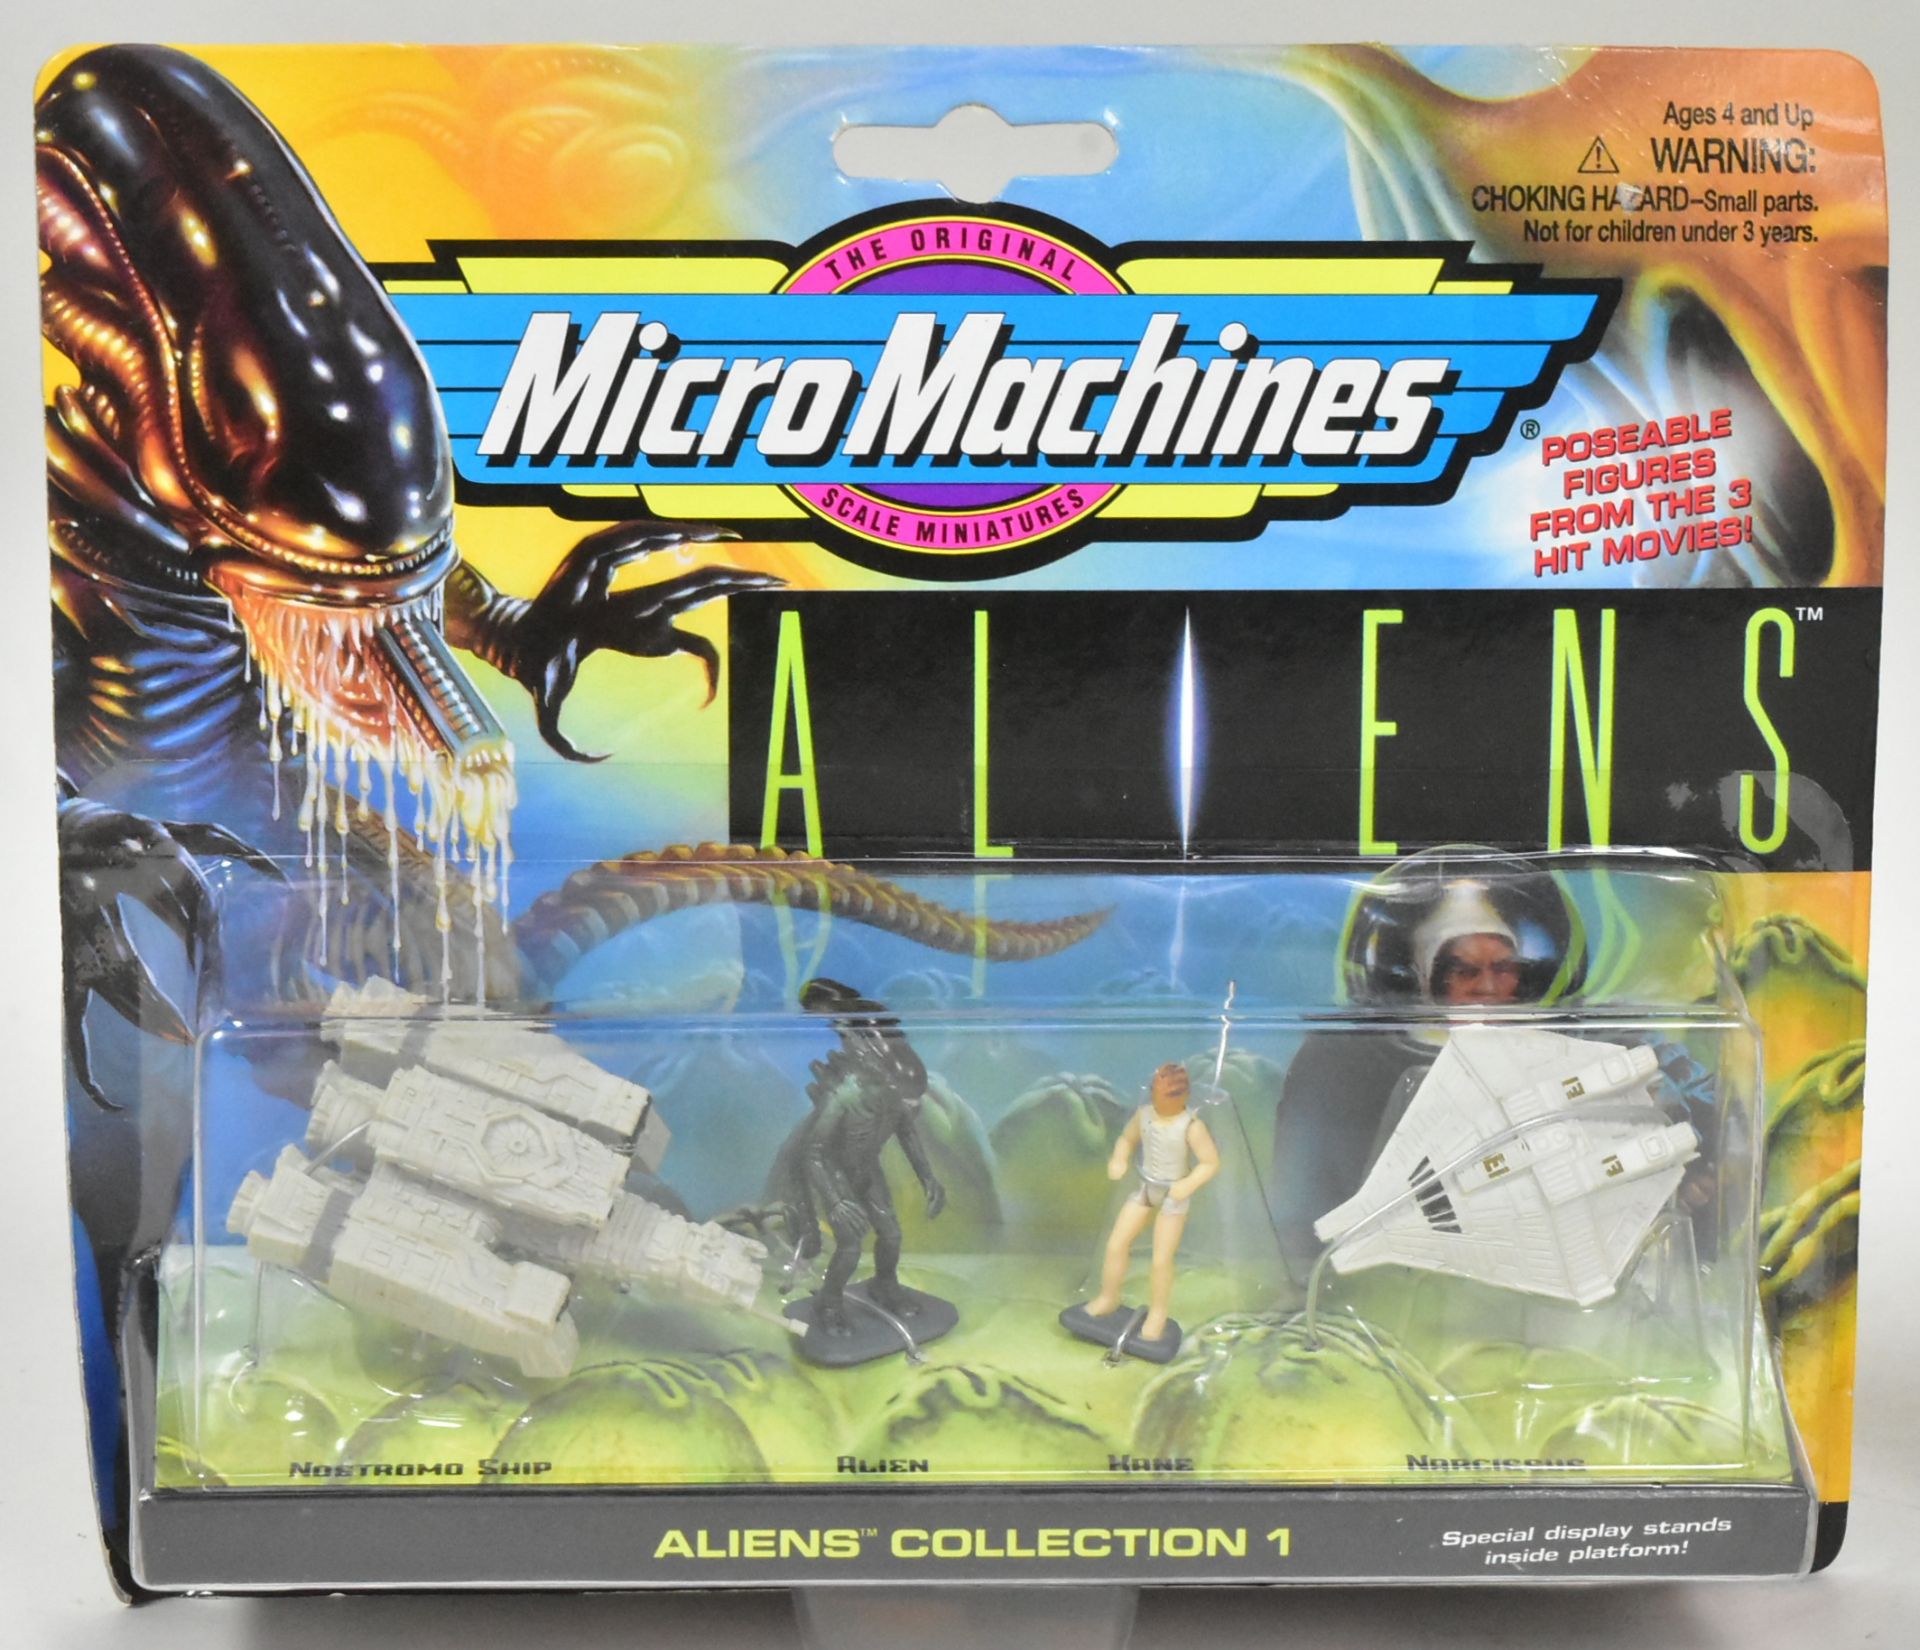 MICRO MACHINES - X3 MICRO MACHINES ALIEN COLLECTION 1, 2 & 3 - Image 2 of 4